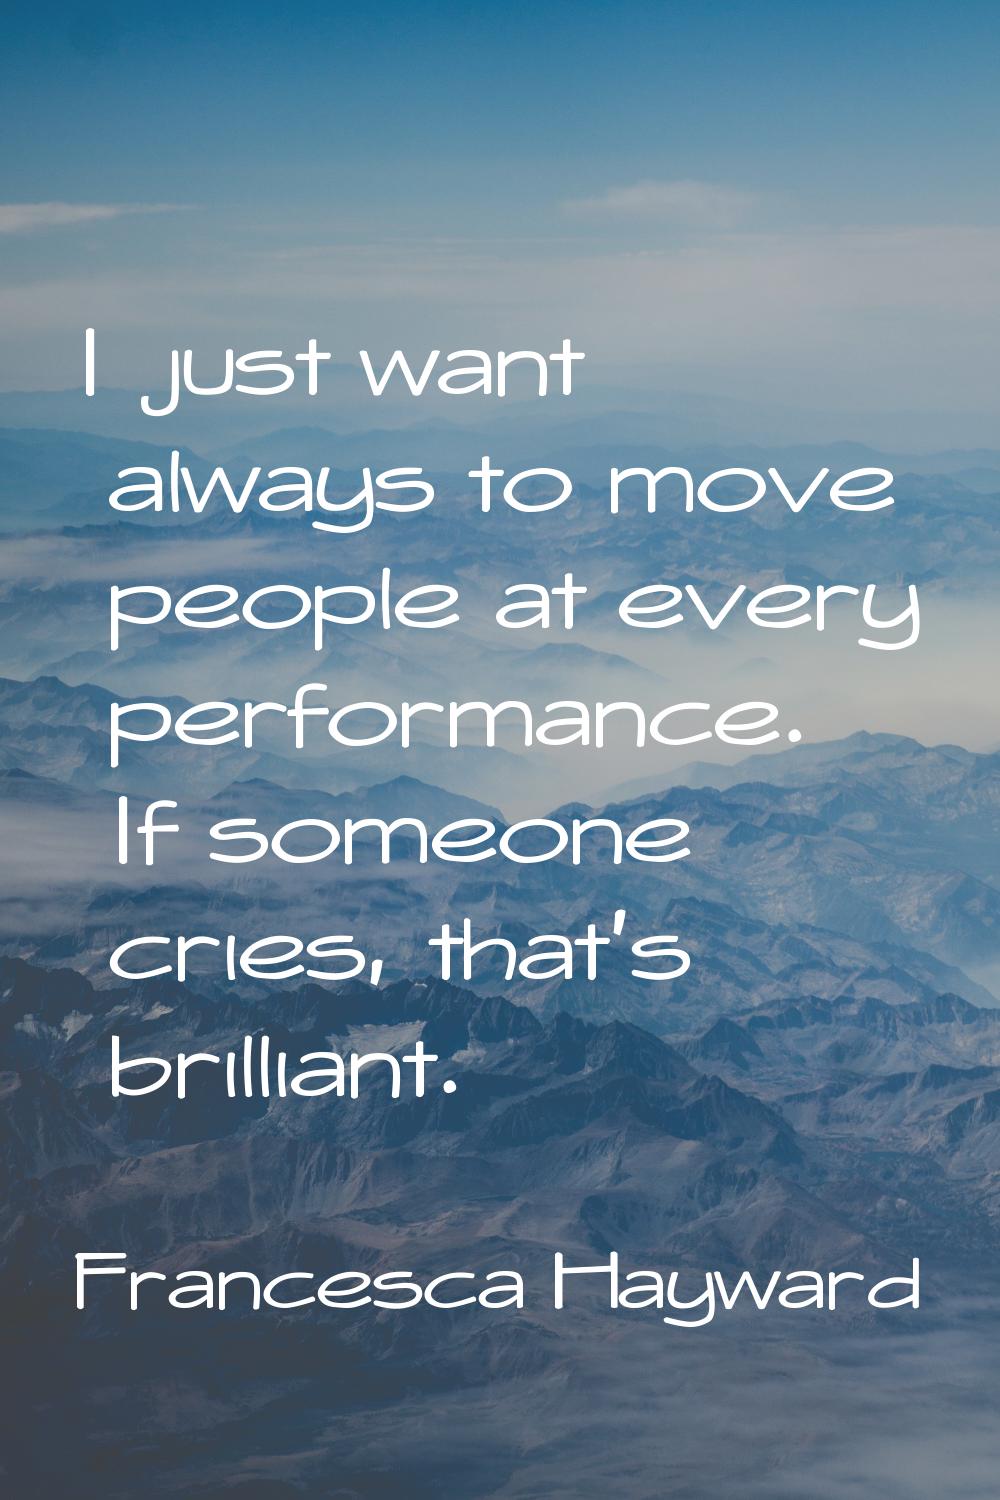 I just want always to move people at every performance. If someone cries, that's brilliant.